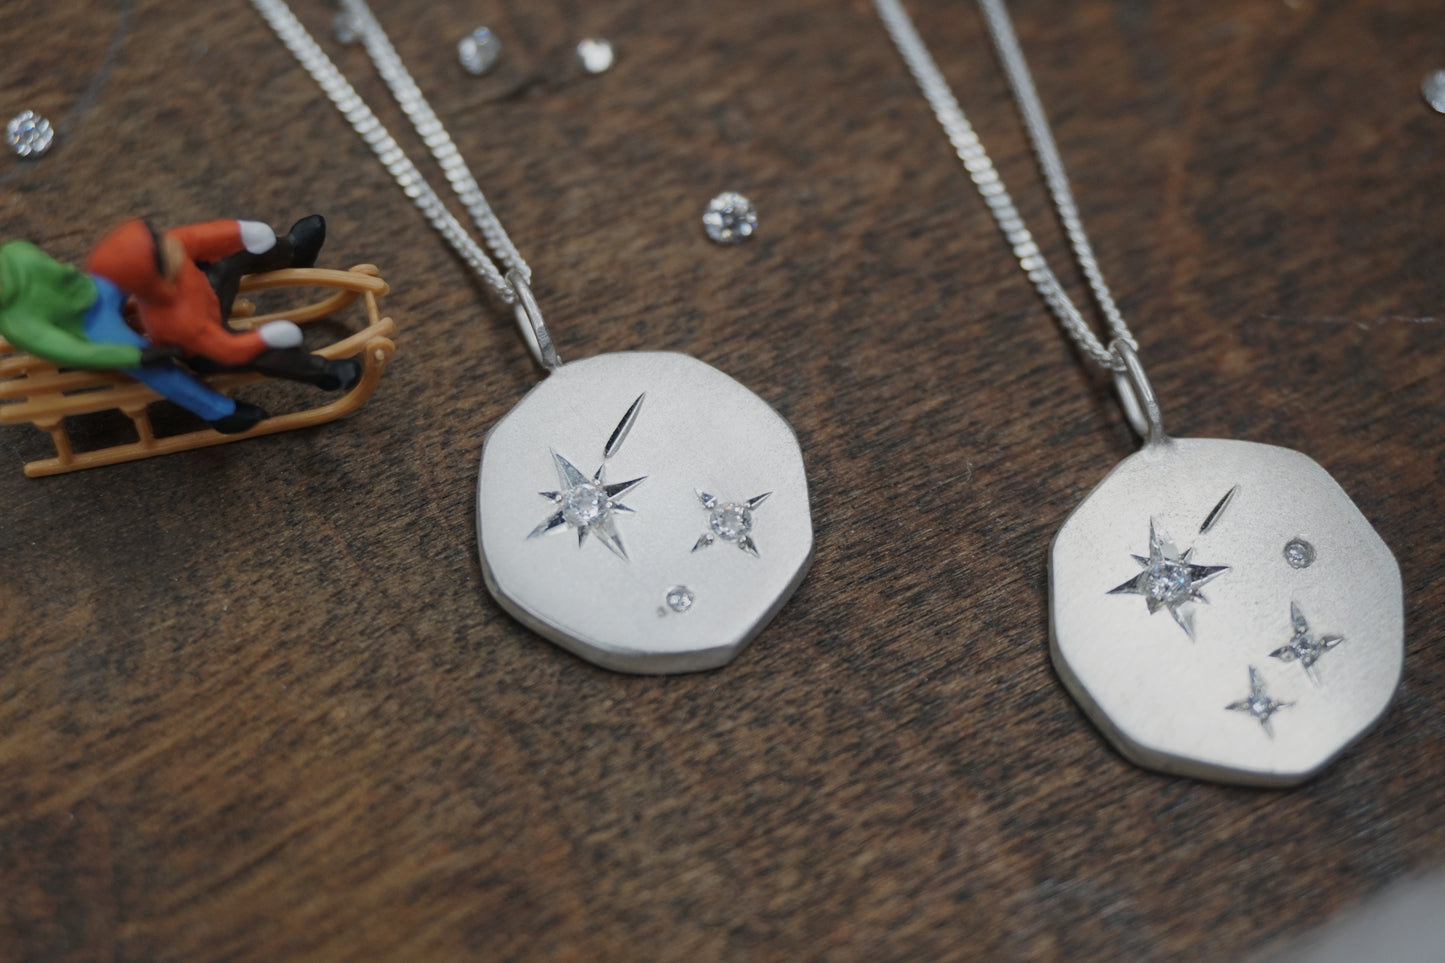 Guidance Star Necklace